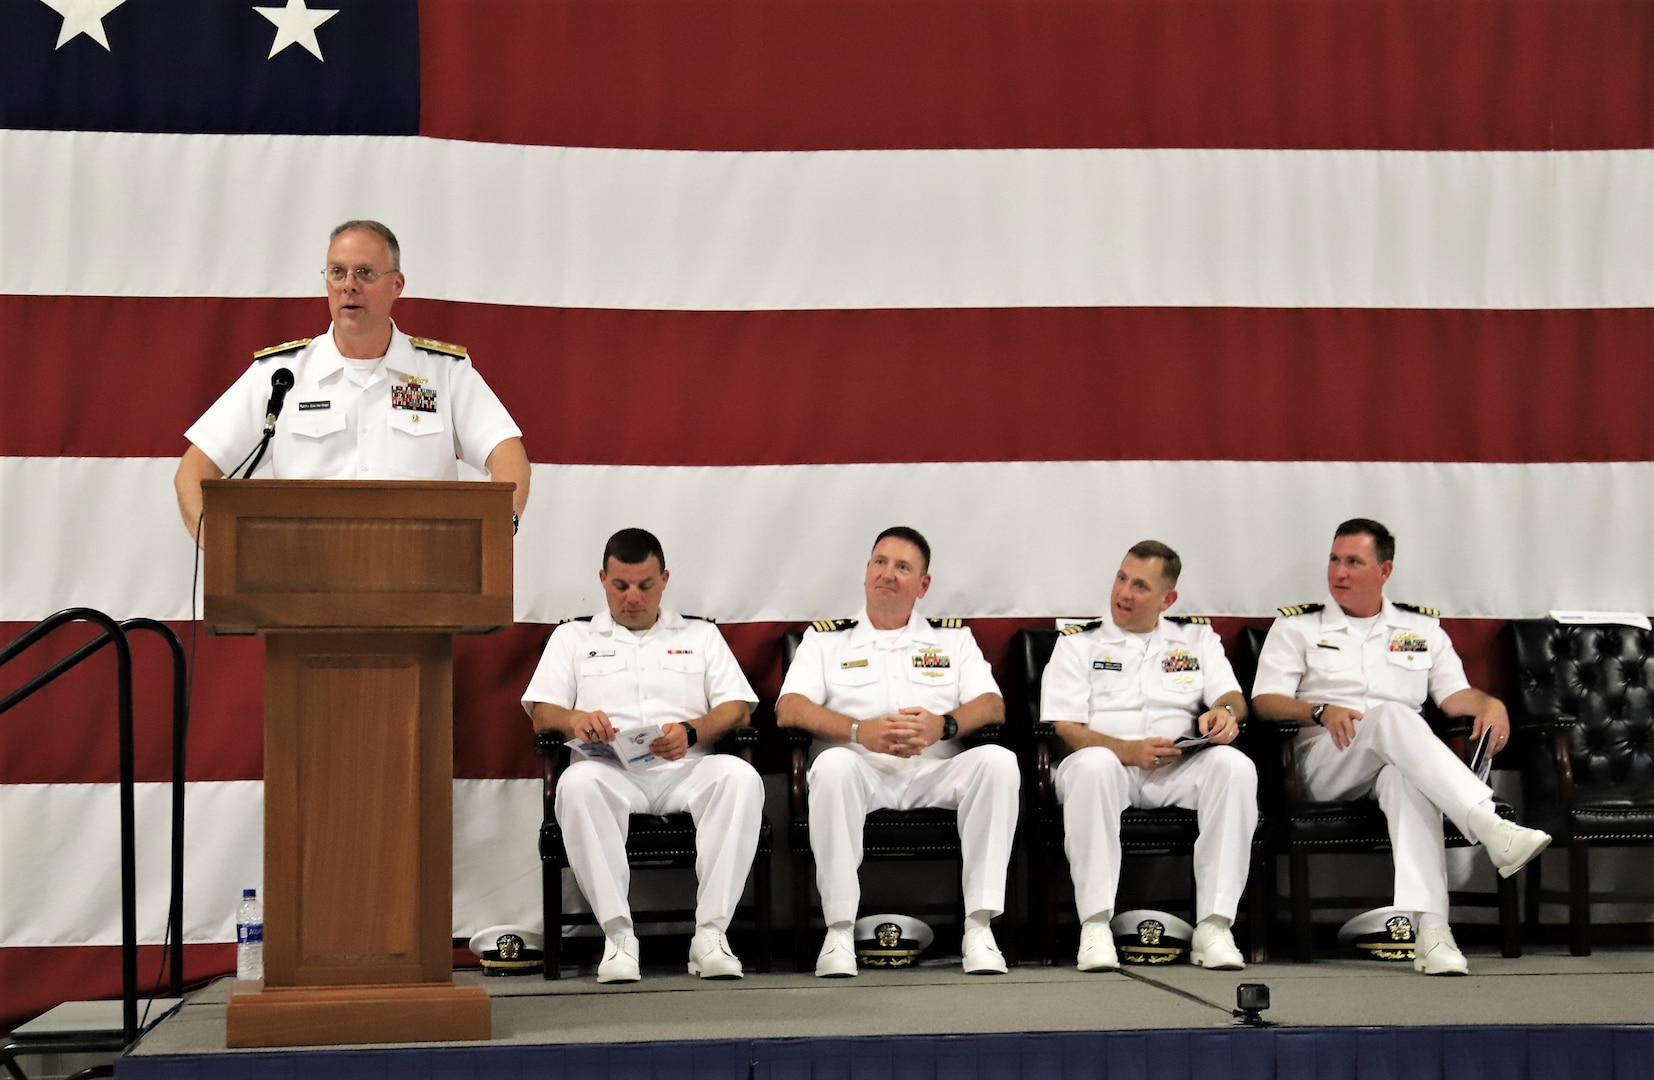 IMAGE: (Far left) Rear Adm. Eric Ver Hage, Commander NAVSEA Warfare Centers, speaks to more than 200 Sailors and guests attending a traditional Change of Command ceremony at Naval Air Station (NAS) Oceana’s Center for Naval Aviation Technical Training Unit’s ceremonial hangar aboard NAS Oceana June 27 where Cmdr. Andrew Hoffman was relieved of command by Cmdr. Joseph Oravec. Oravec became the 28th commanding officer, Naval Surface Warfare Center Dahlgren Division, Dam Neck Activity.